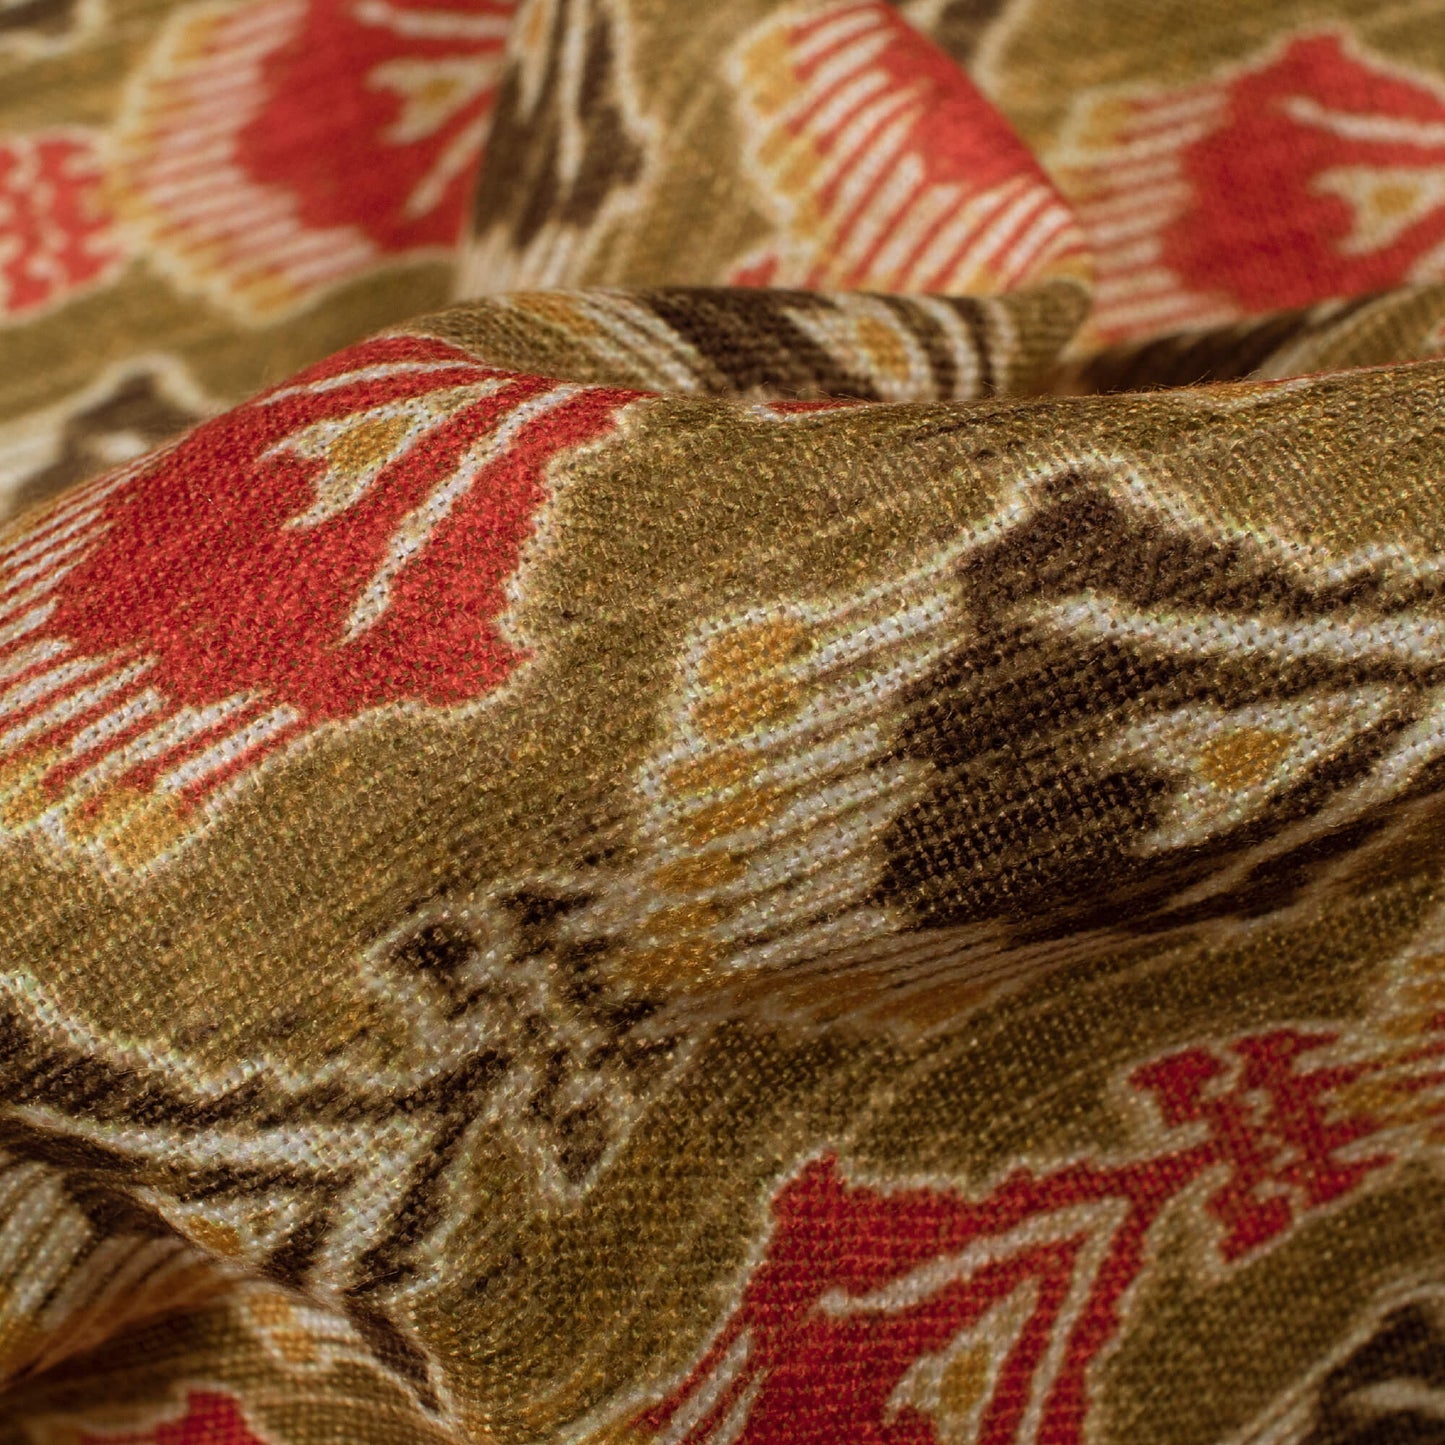 Olive Green And Persian Red Booti Pattern Digital Print Linen Textured Fabric (Width 56 Inches)